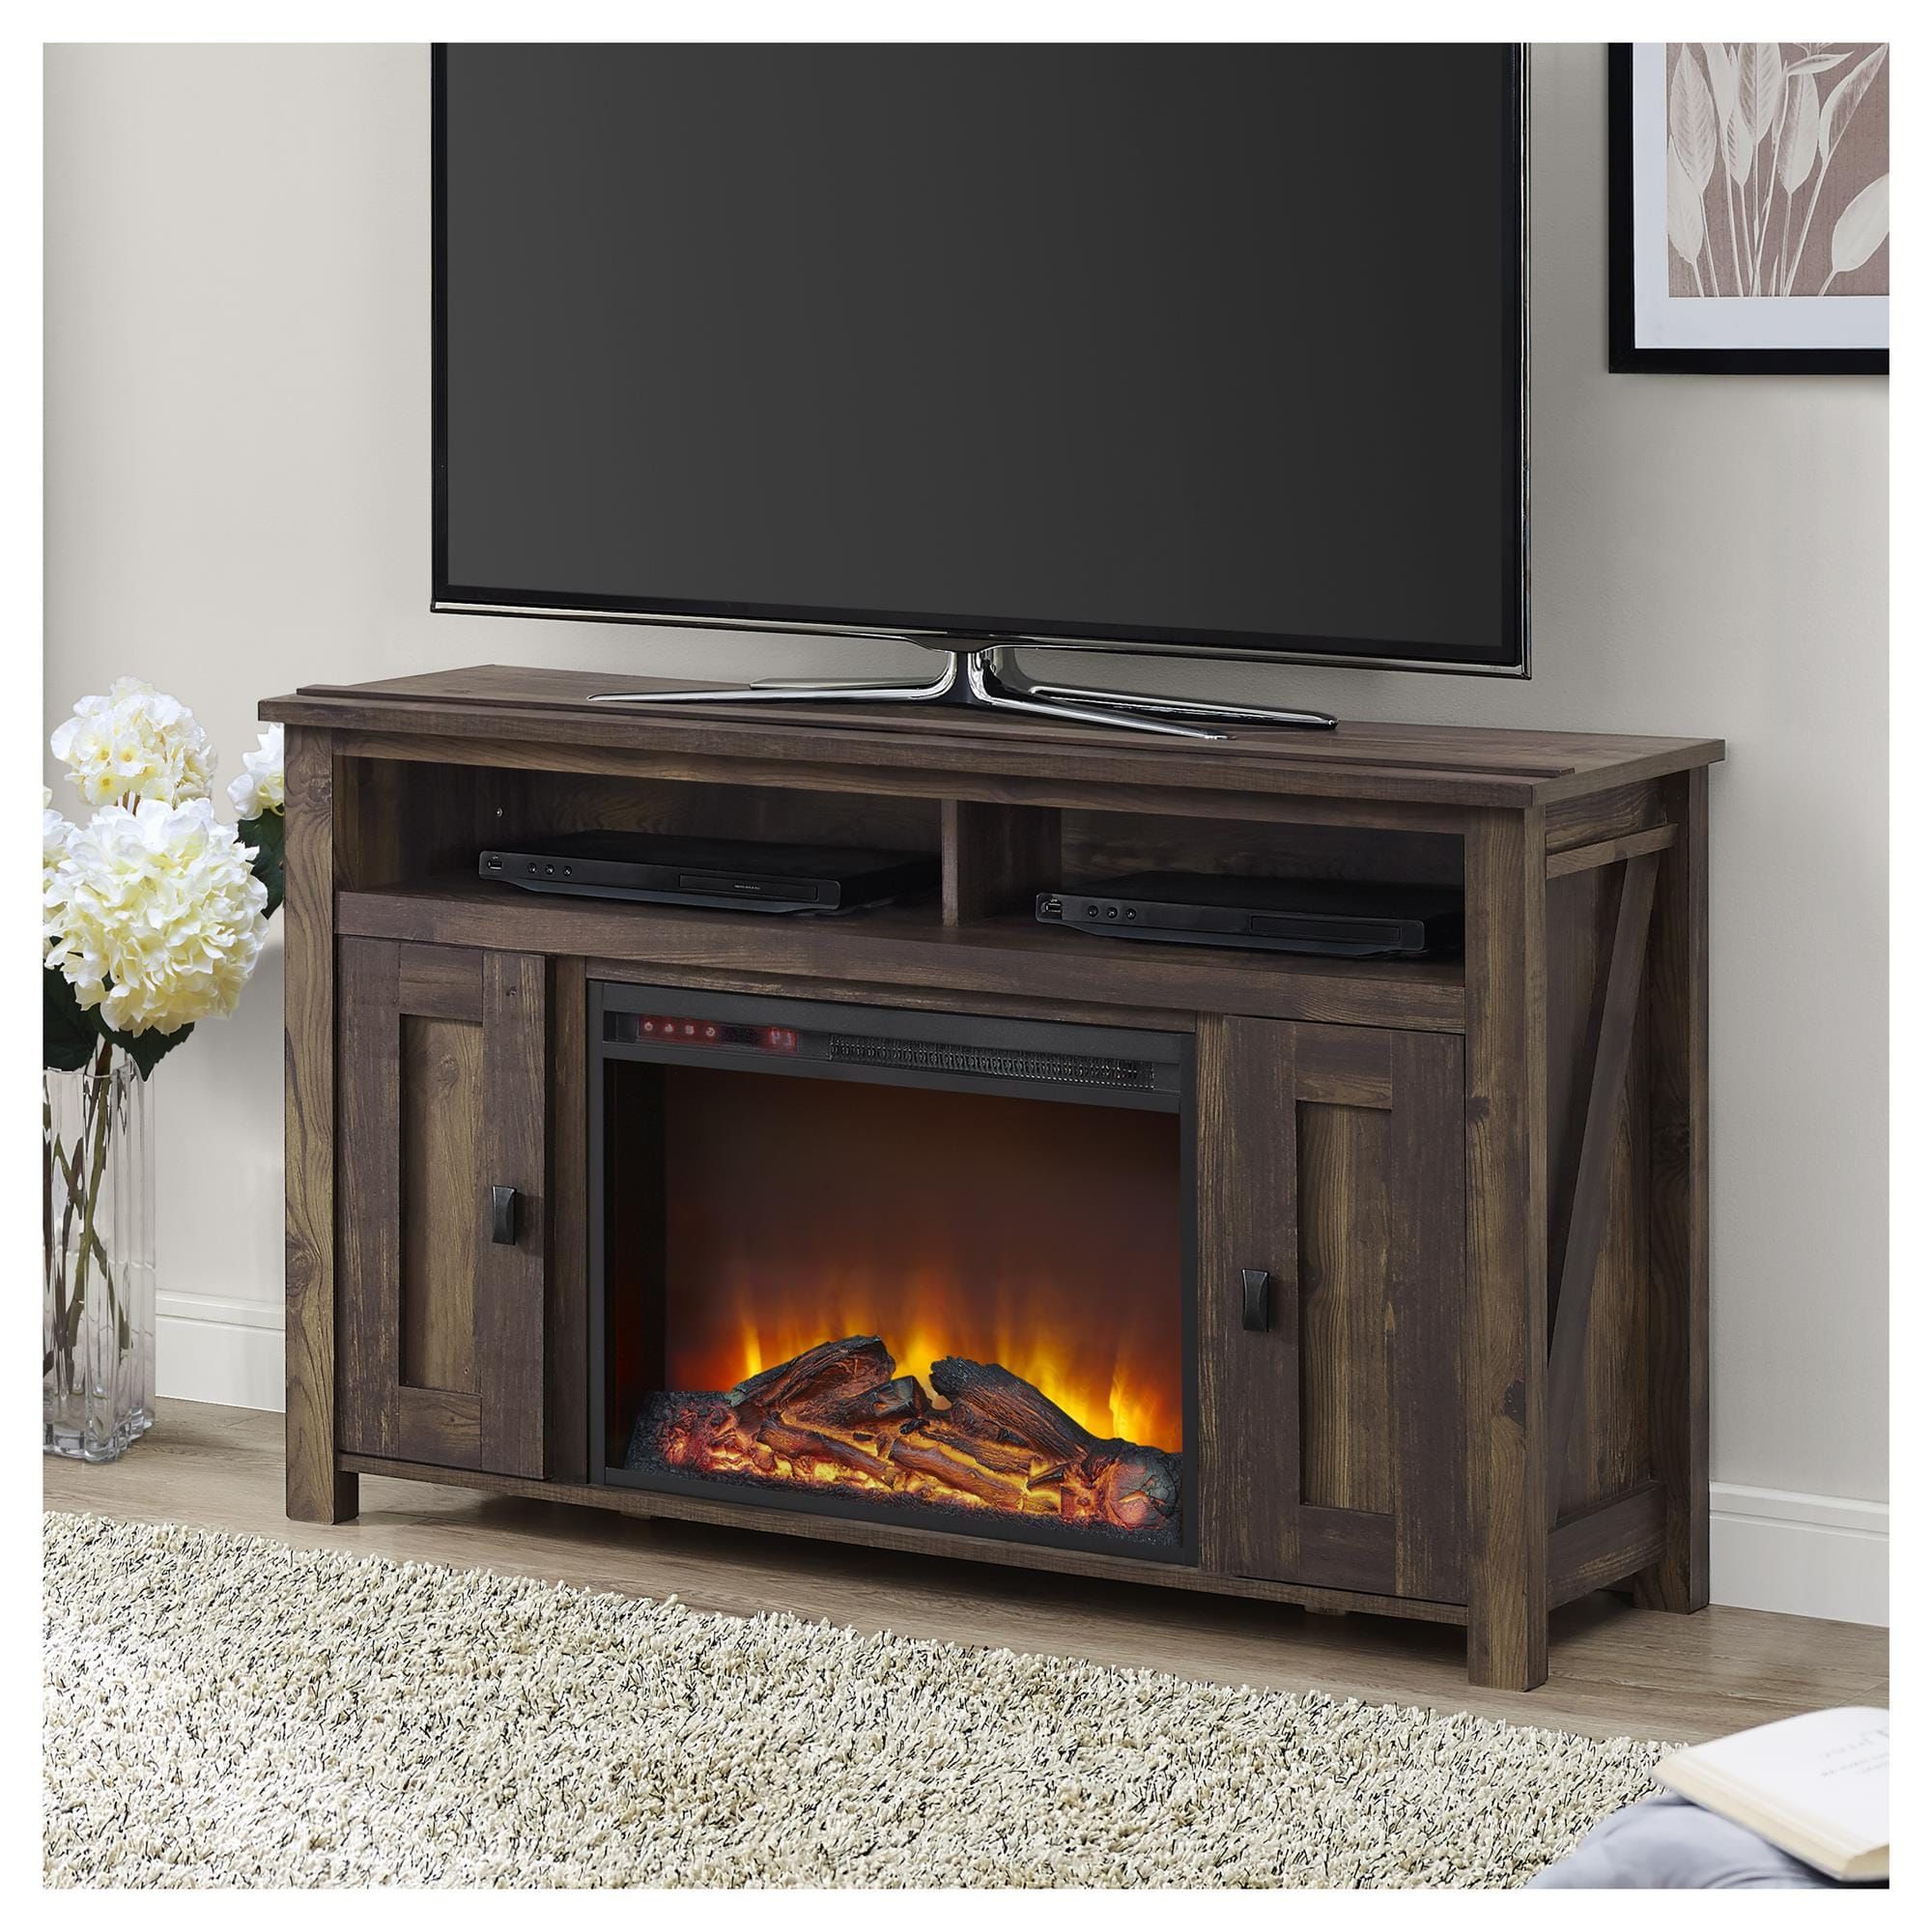 Ameriwood Home 47.6875 In W Rustic Tv Stand With Fan Forced Electric  Fireplace In The Electric Fireplaces Department At Lowes With Regard To Electric Fireplace Tv Stands (Gallery 18 of 20)